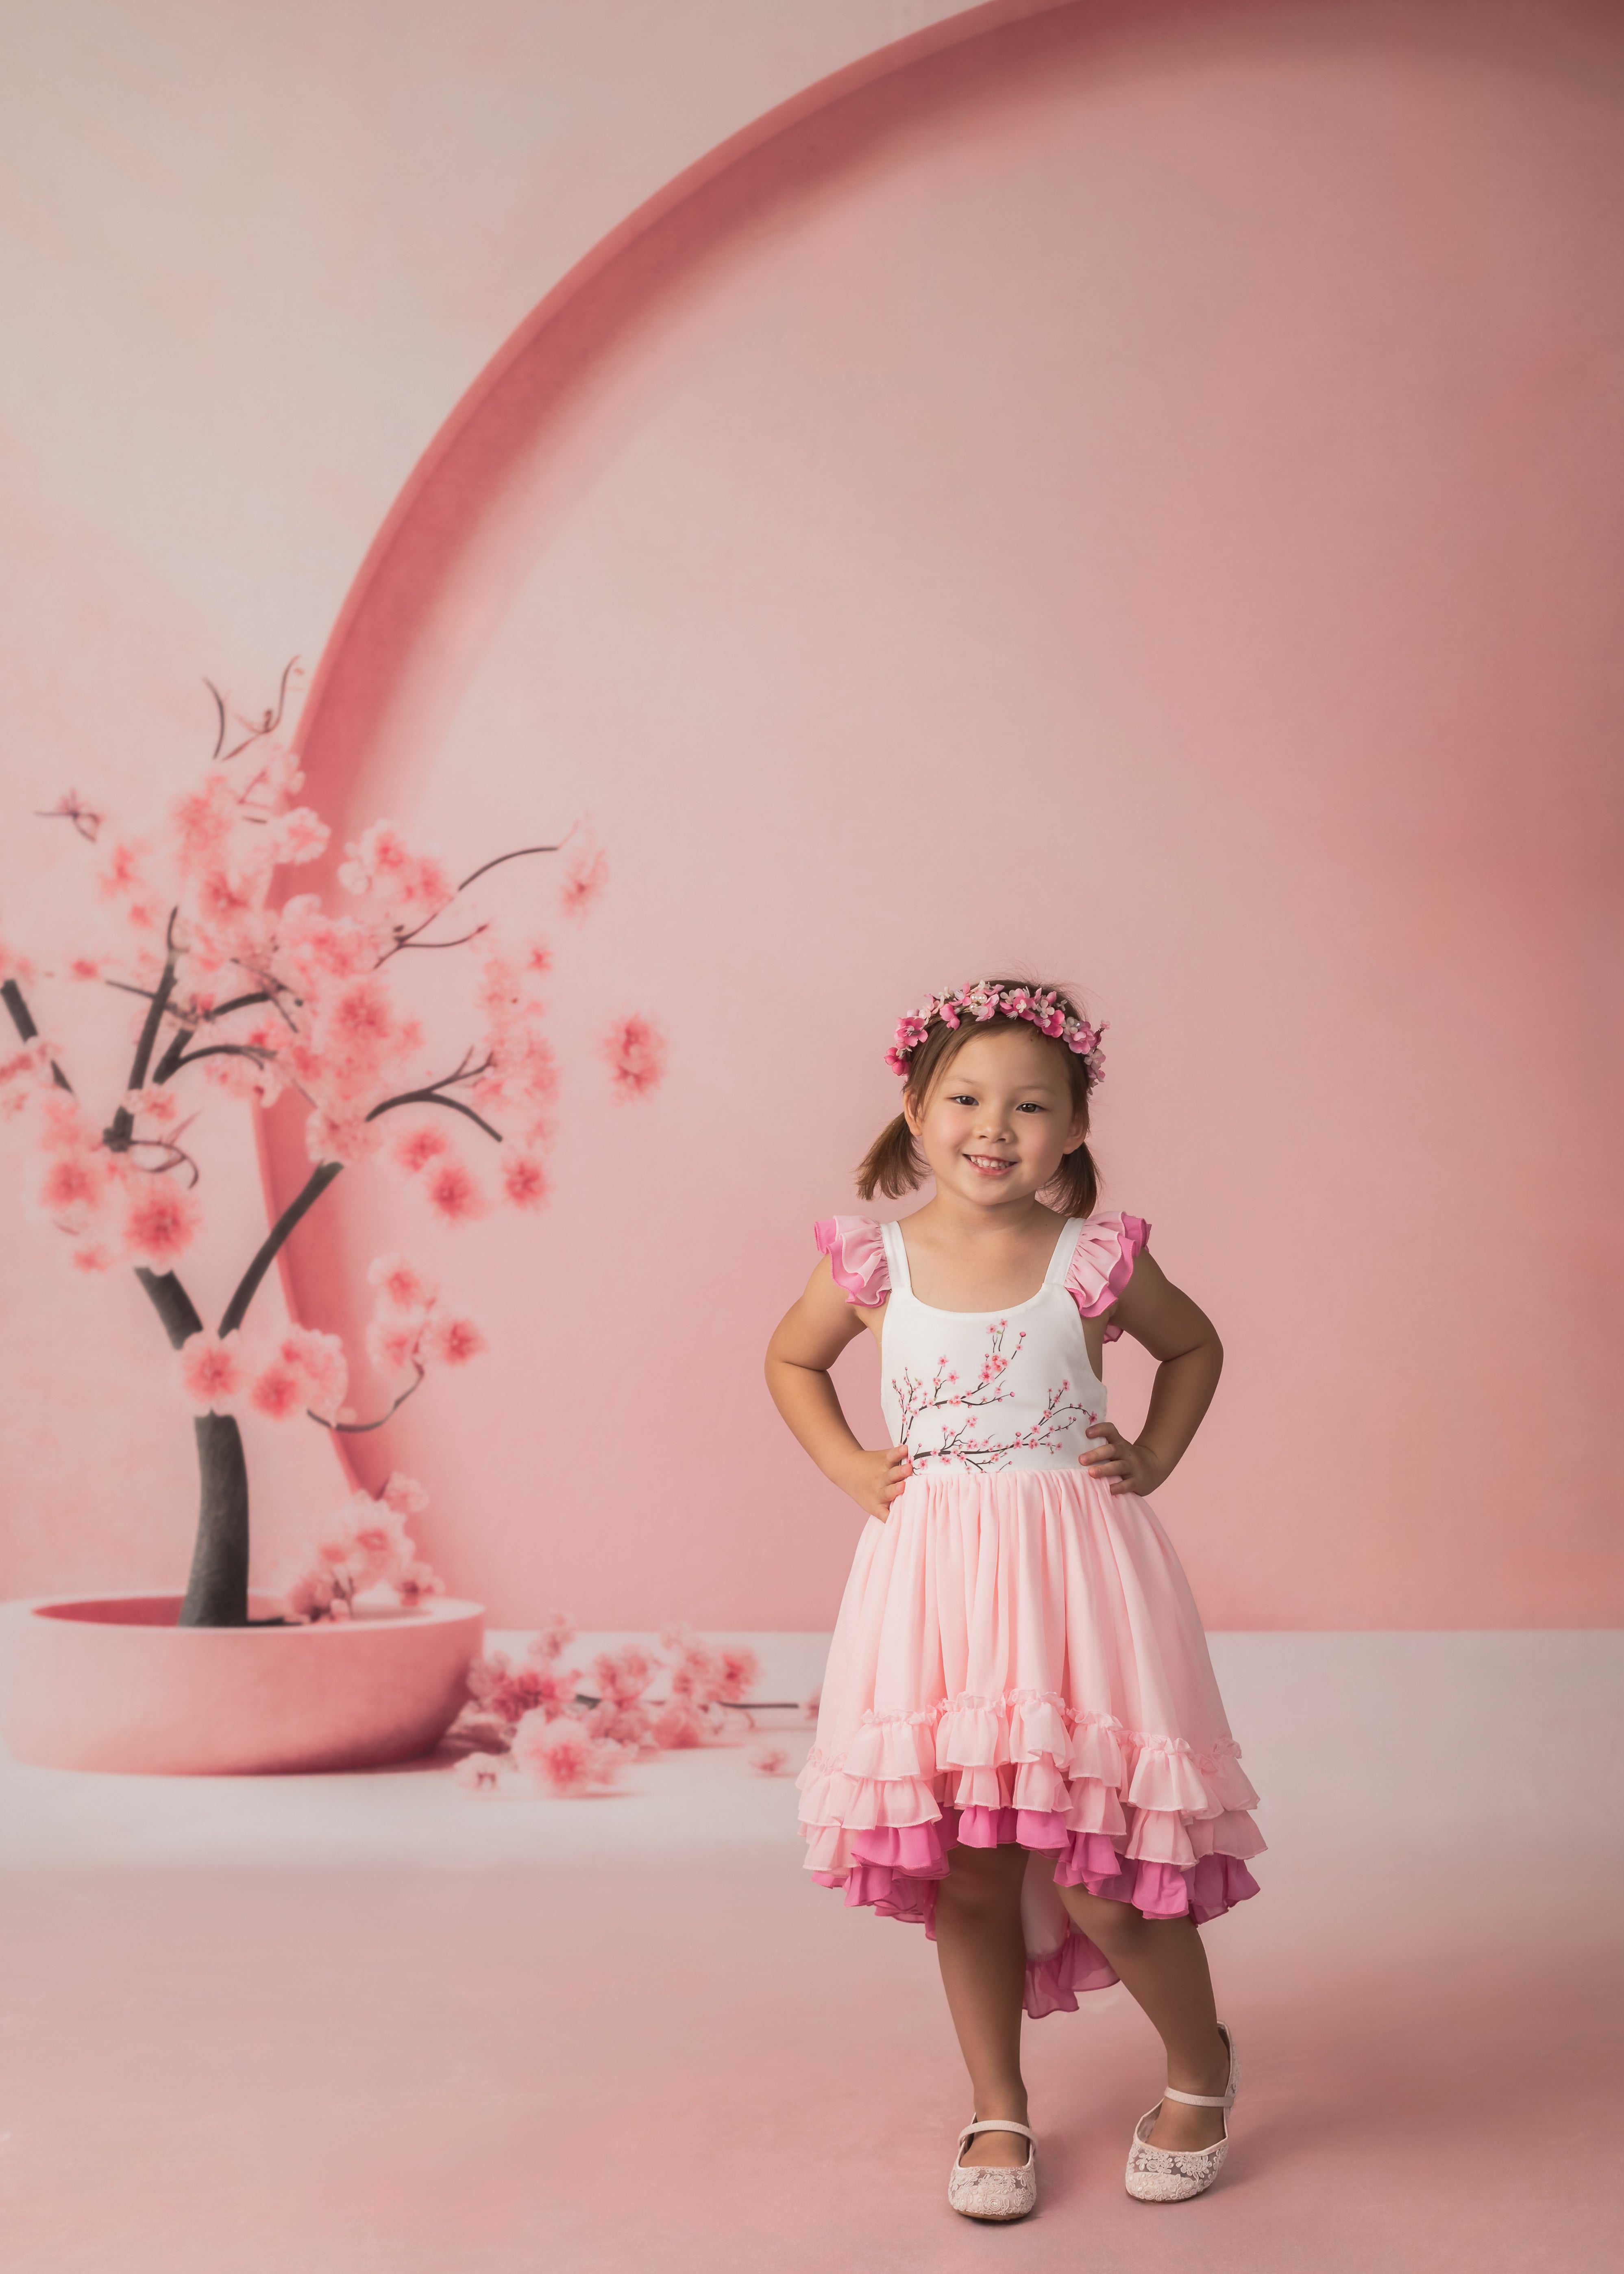 Kate Sweep Spring Pink Backdrop Flower Arch Wall Designed by Happy Squirrel Design